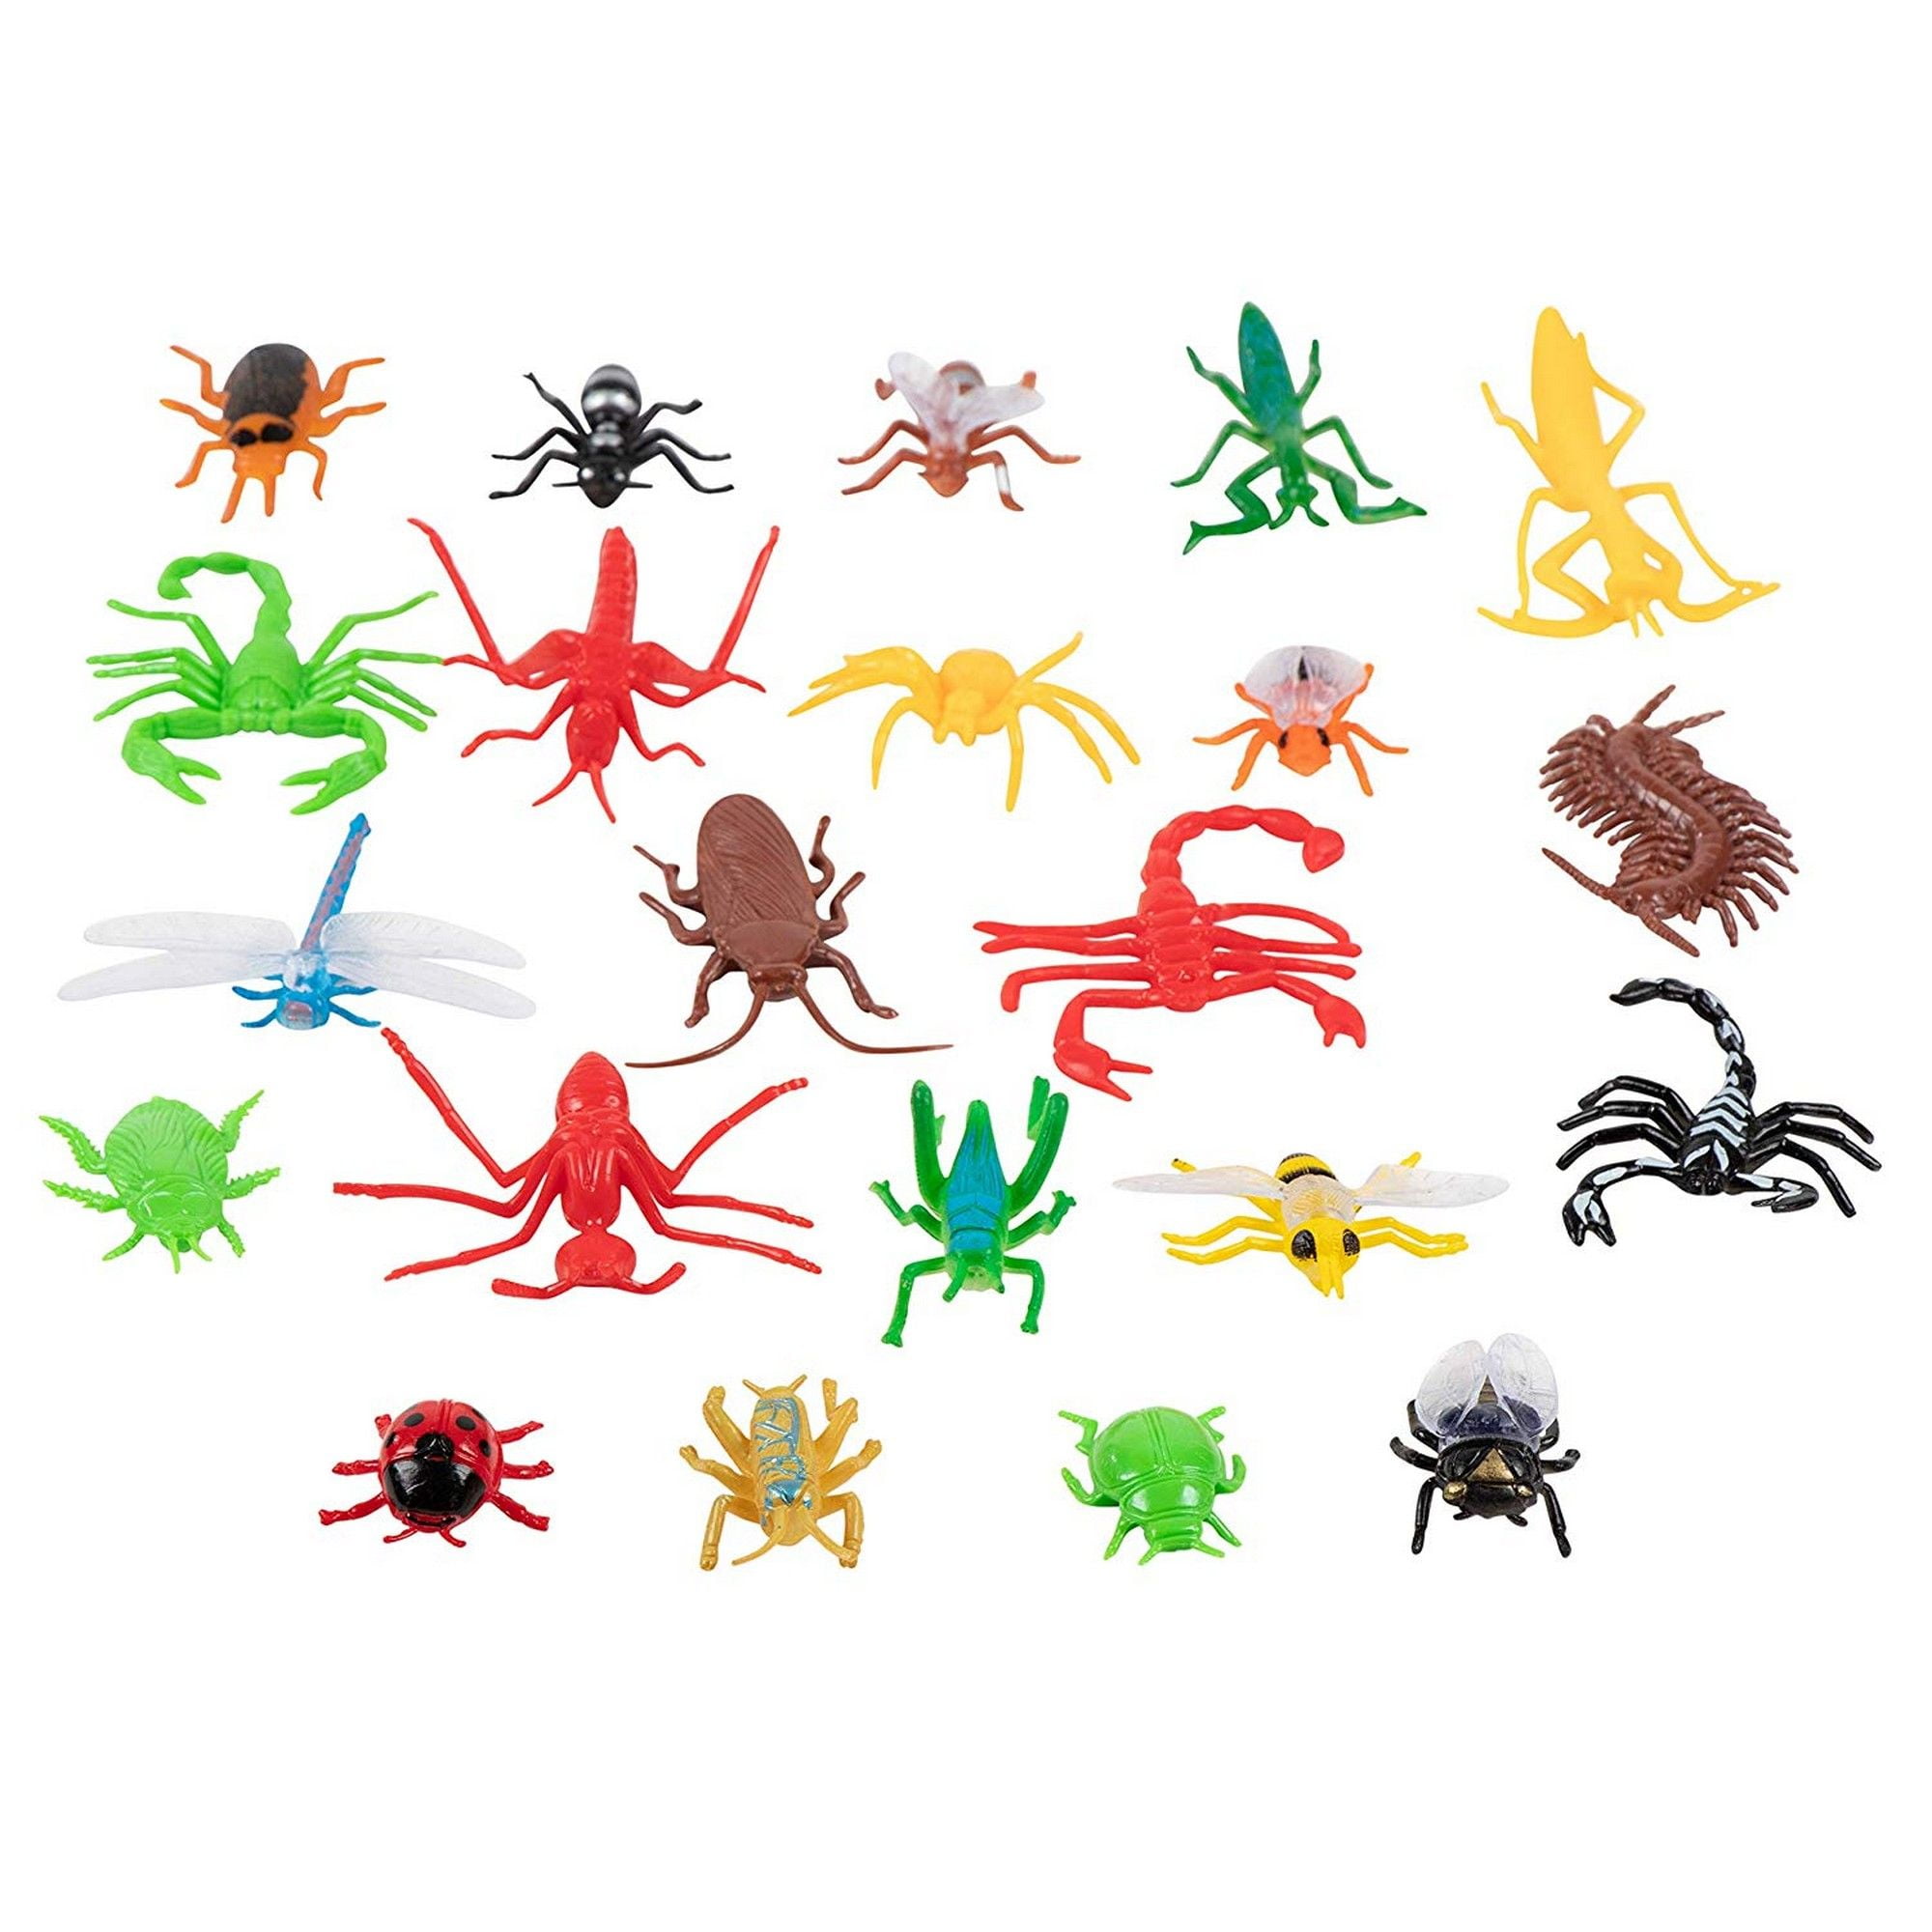 22 Assorted Small Plastic Bugs And Insects For Kids Creepy